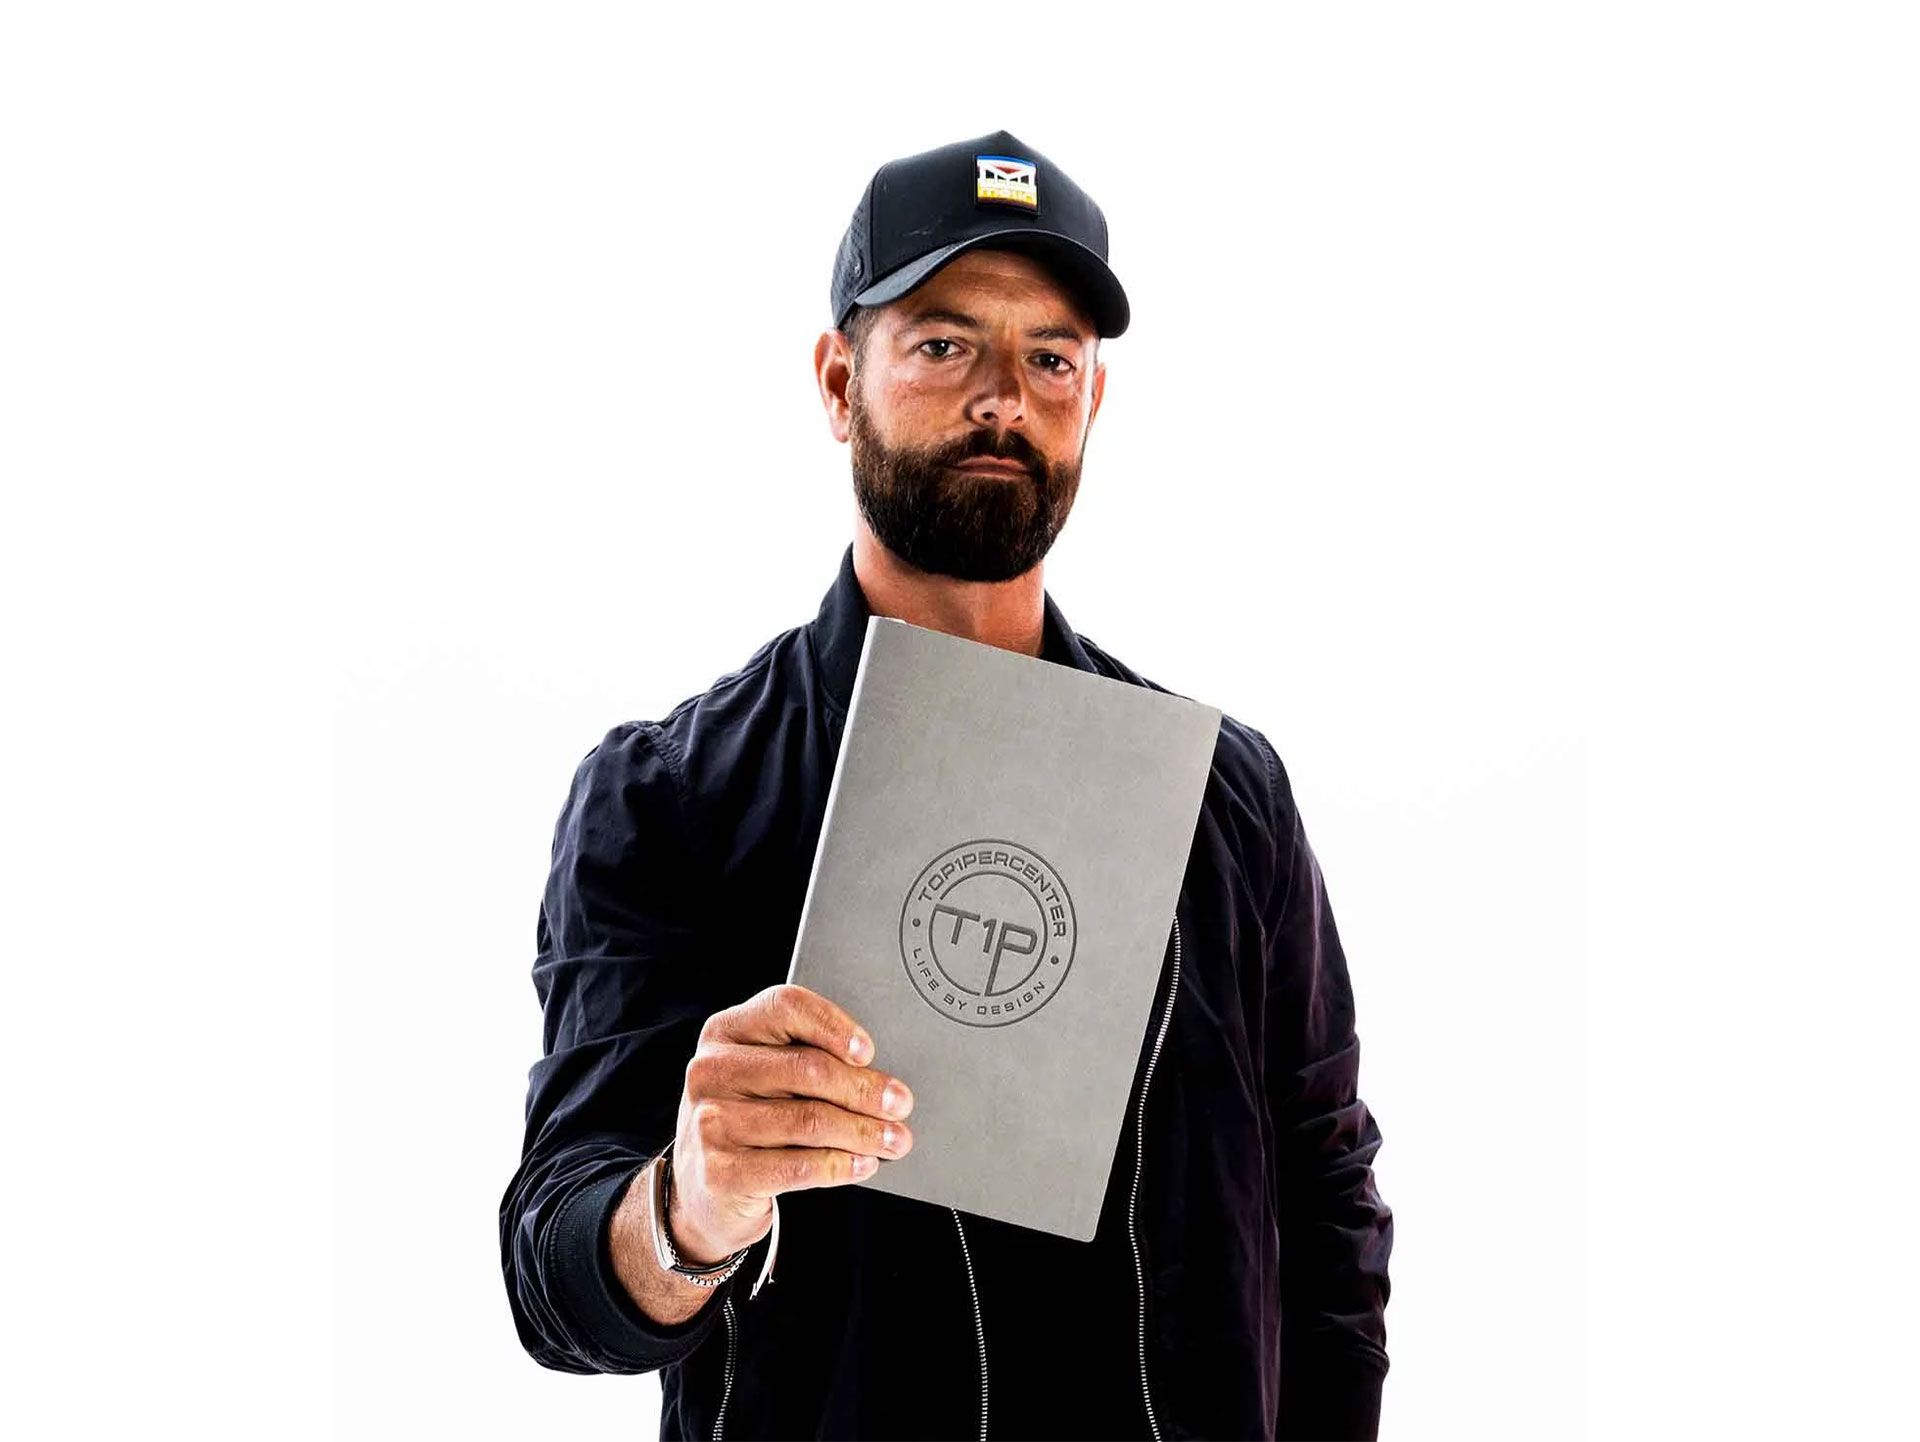 Braun is holding the best journal on the market.